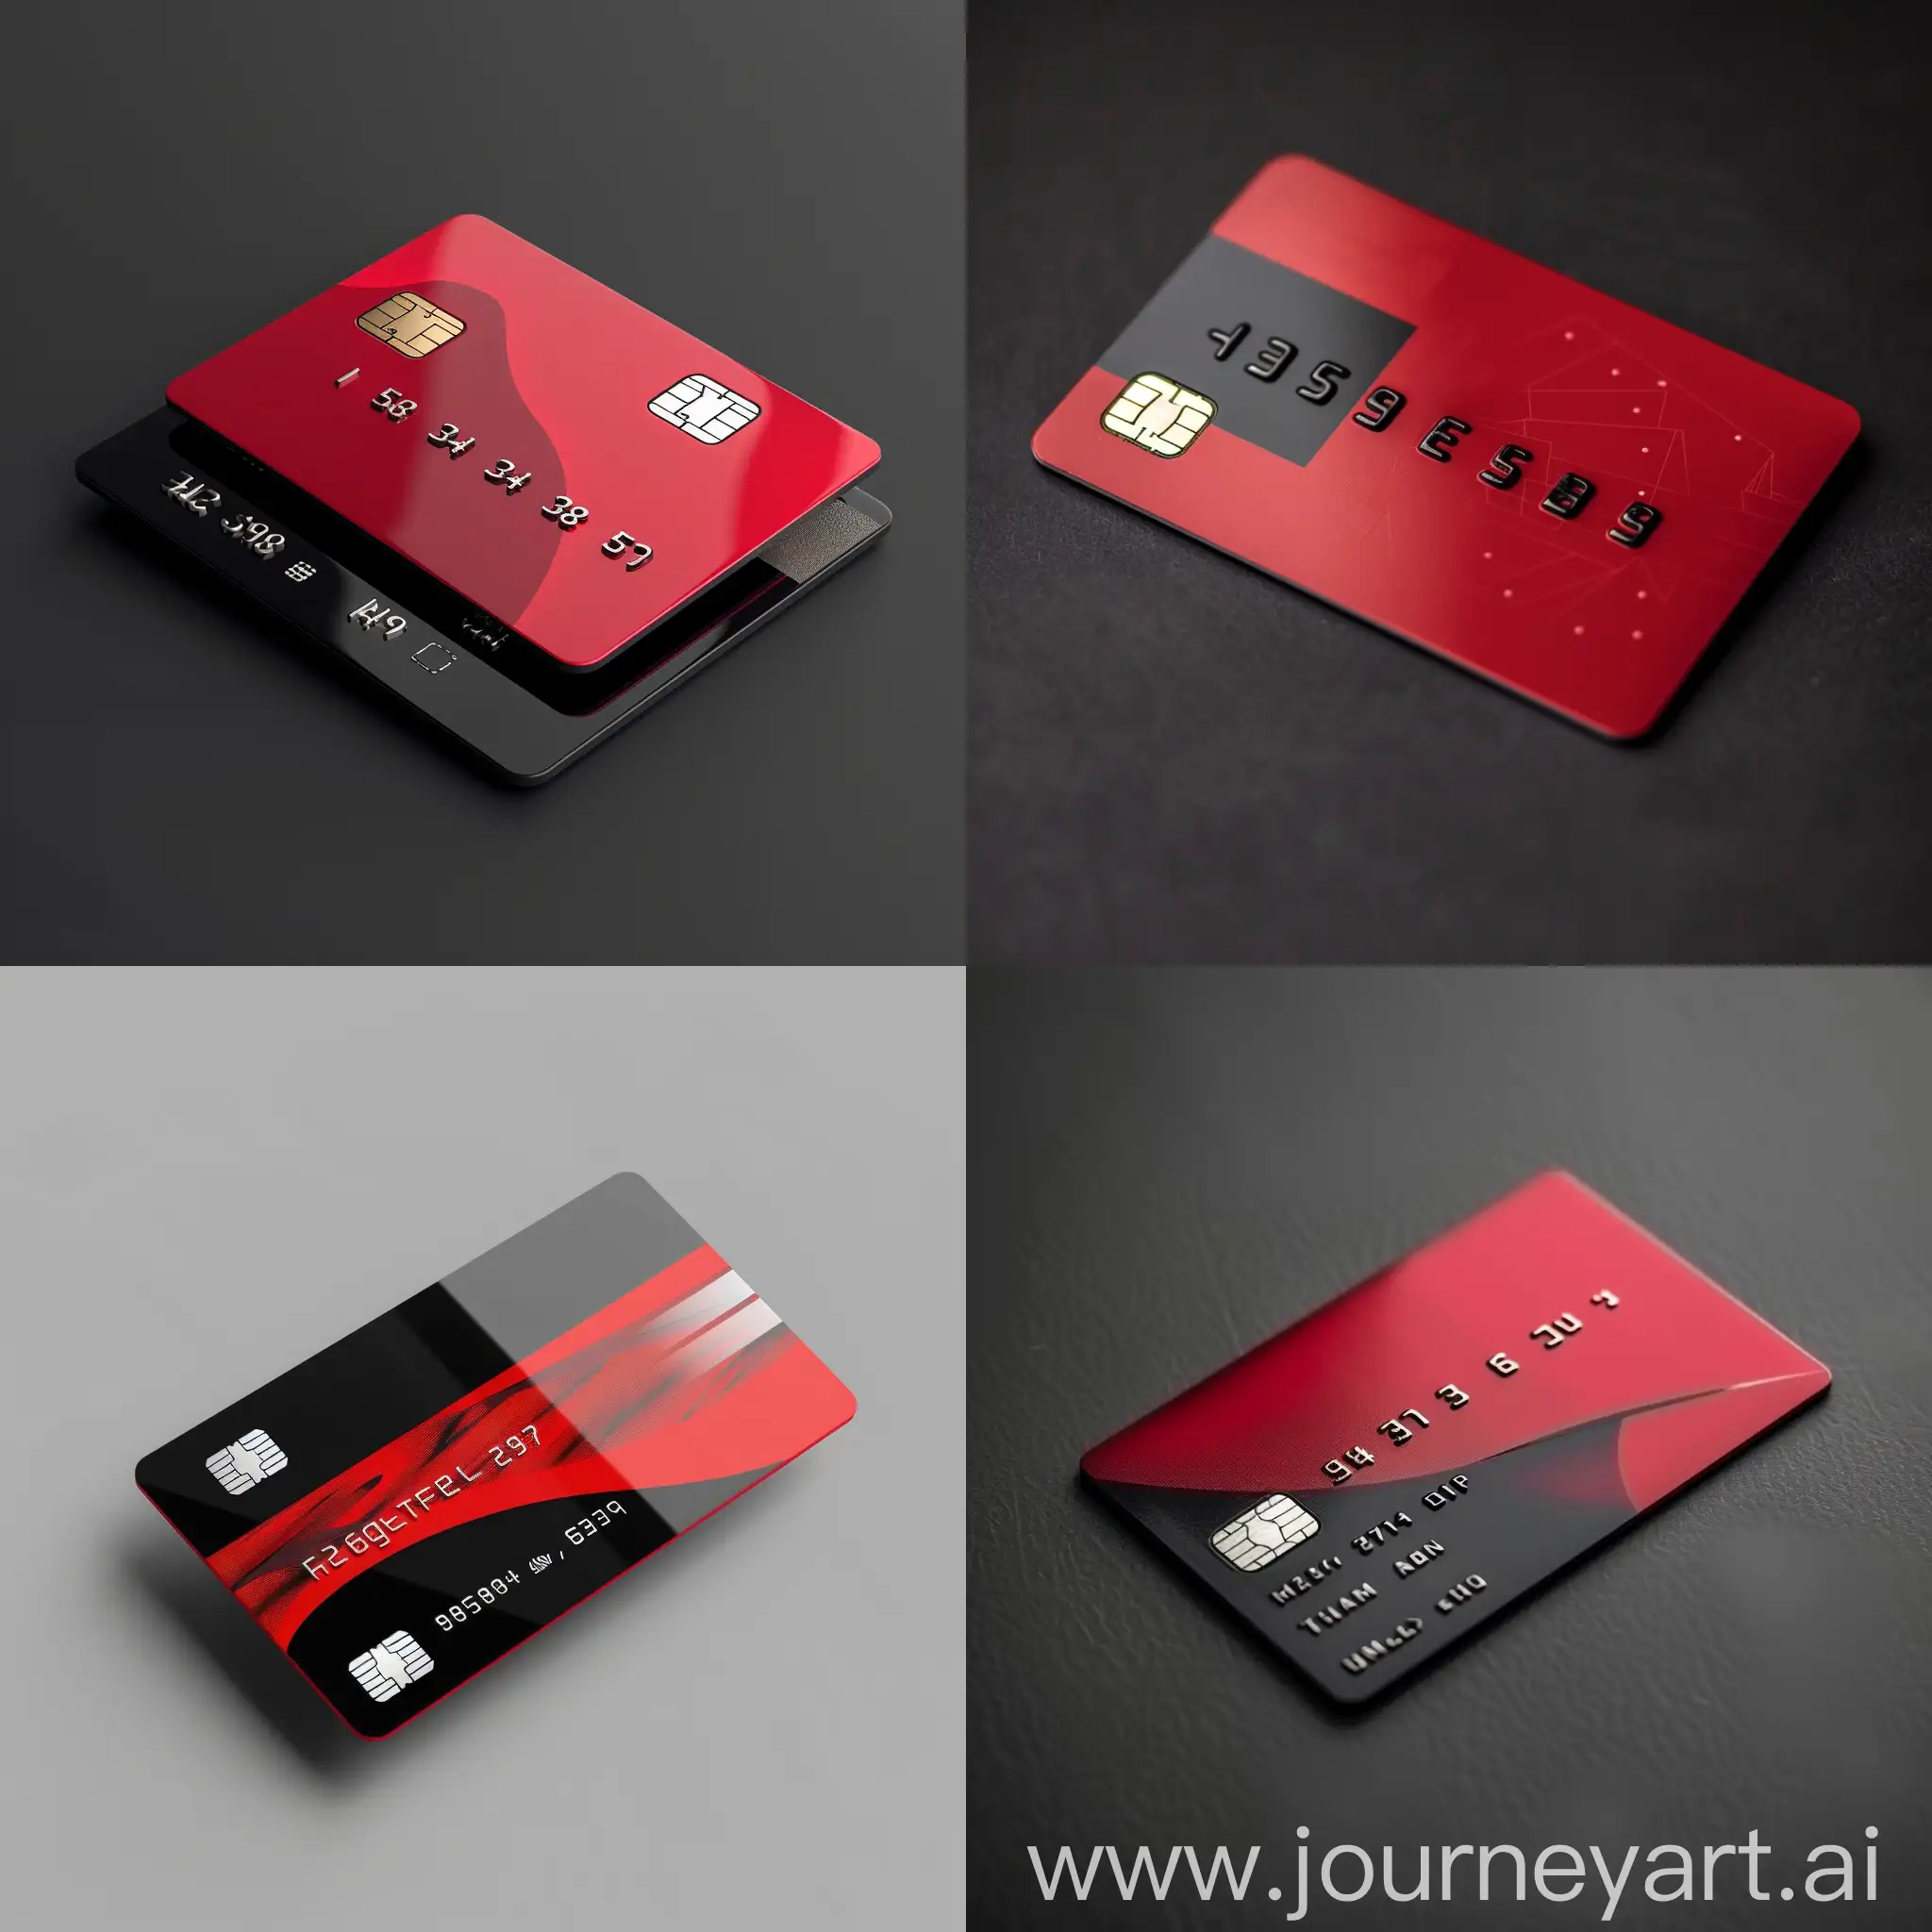 Modern-Red-and-Black-Bank-Card-on-Reflective-Surface